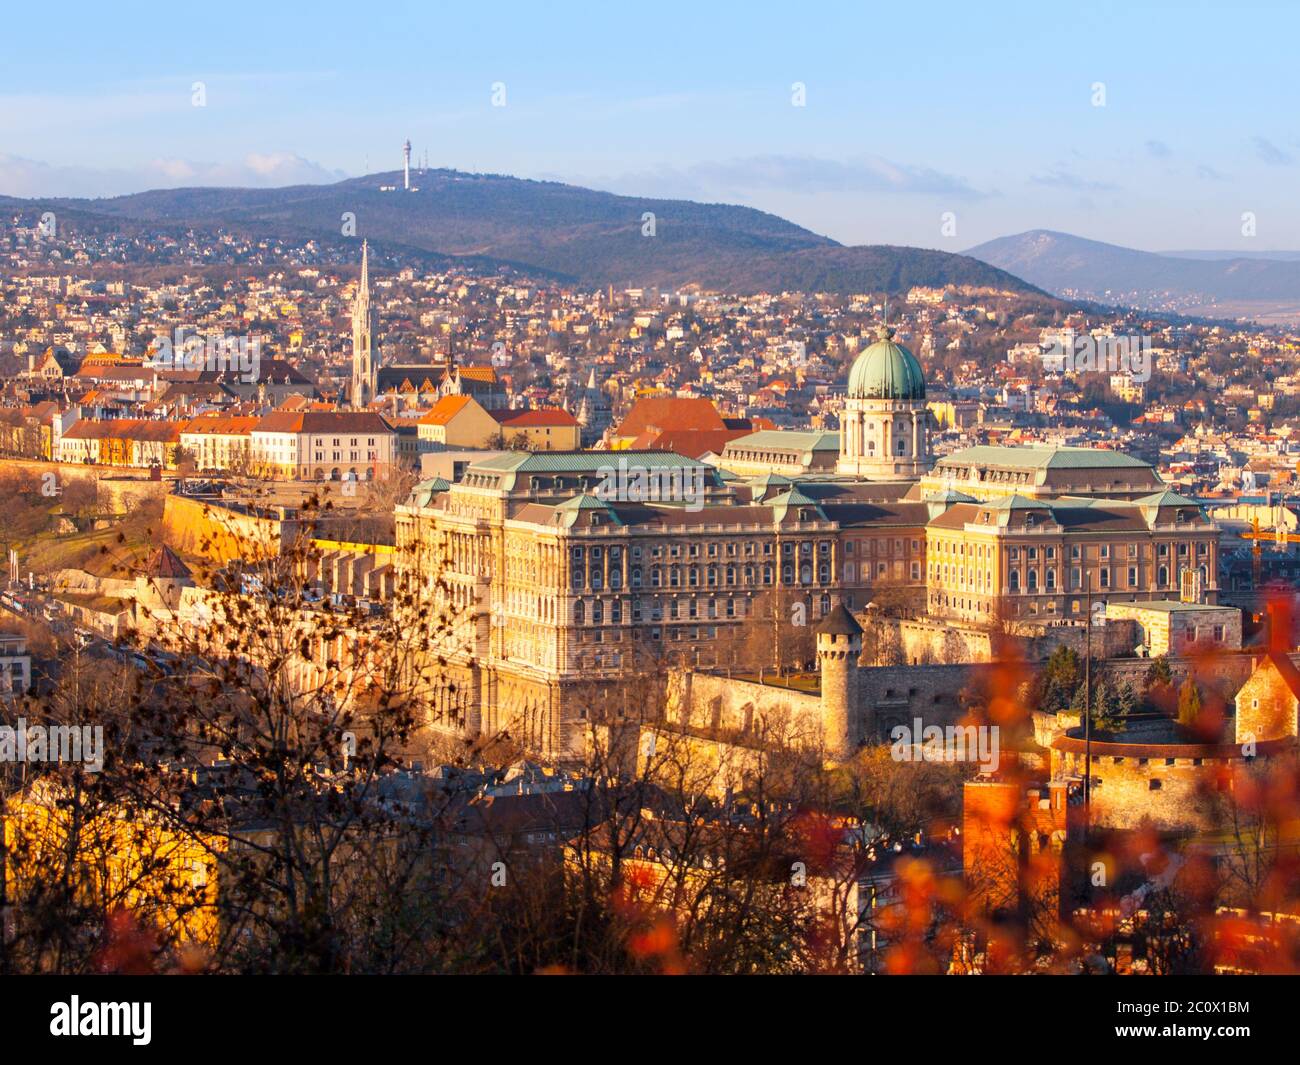 View of Buda Castle from Gellert Hill on sunny evening, Budapest, Hungary, Europe, UNESCO World Heritage Site. Stock Photo